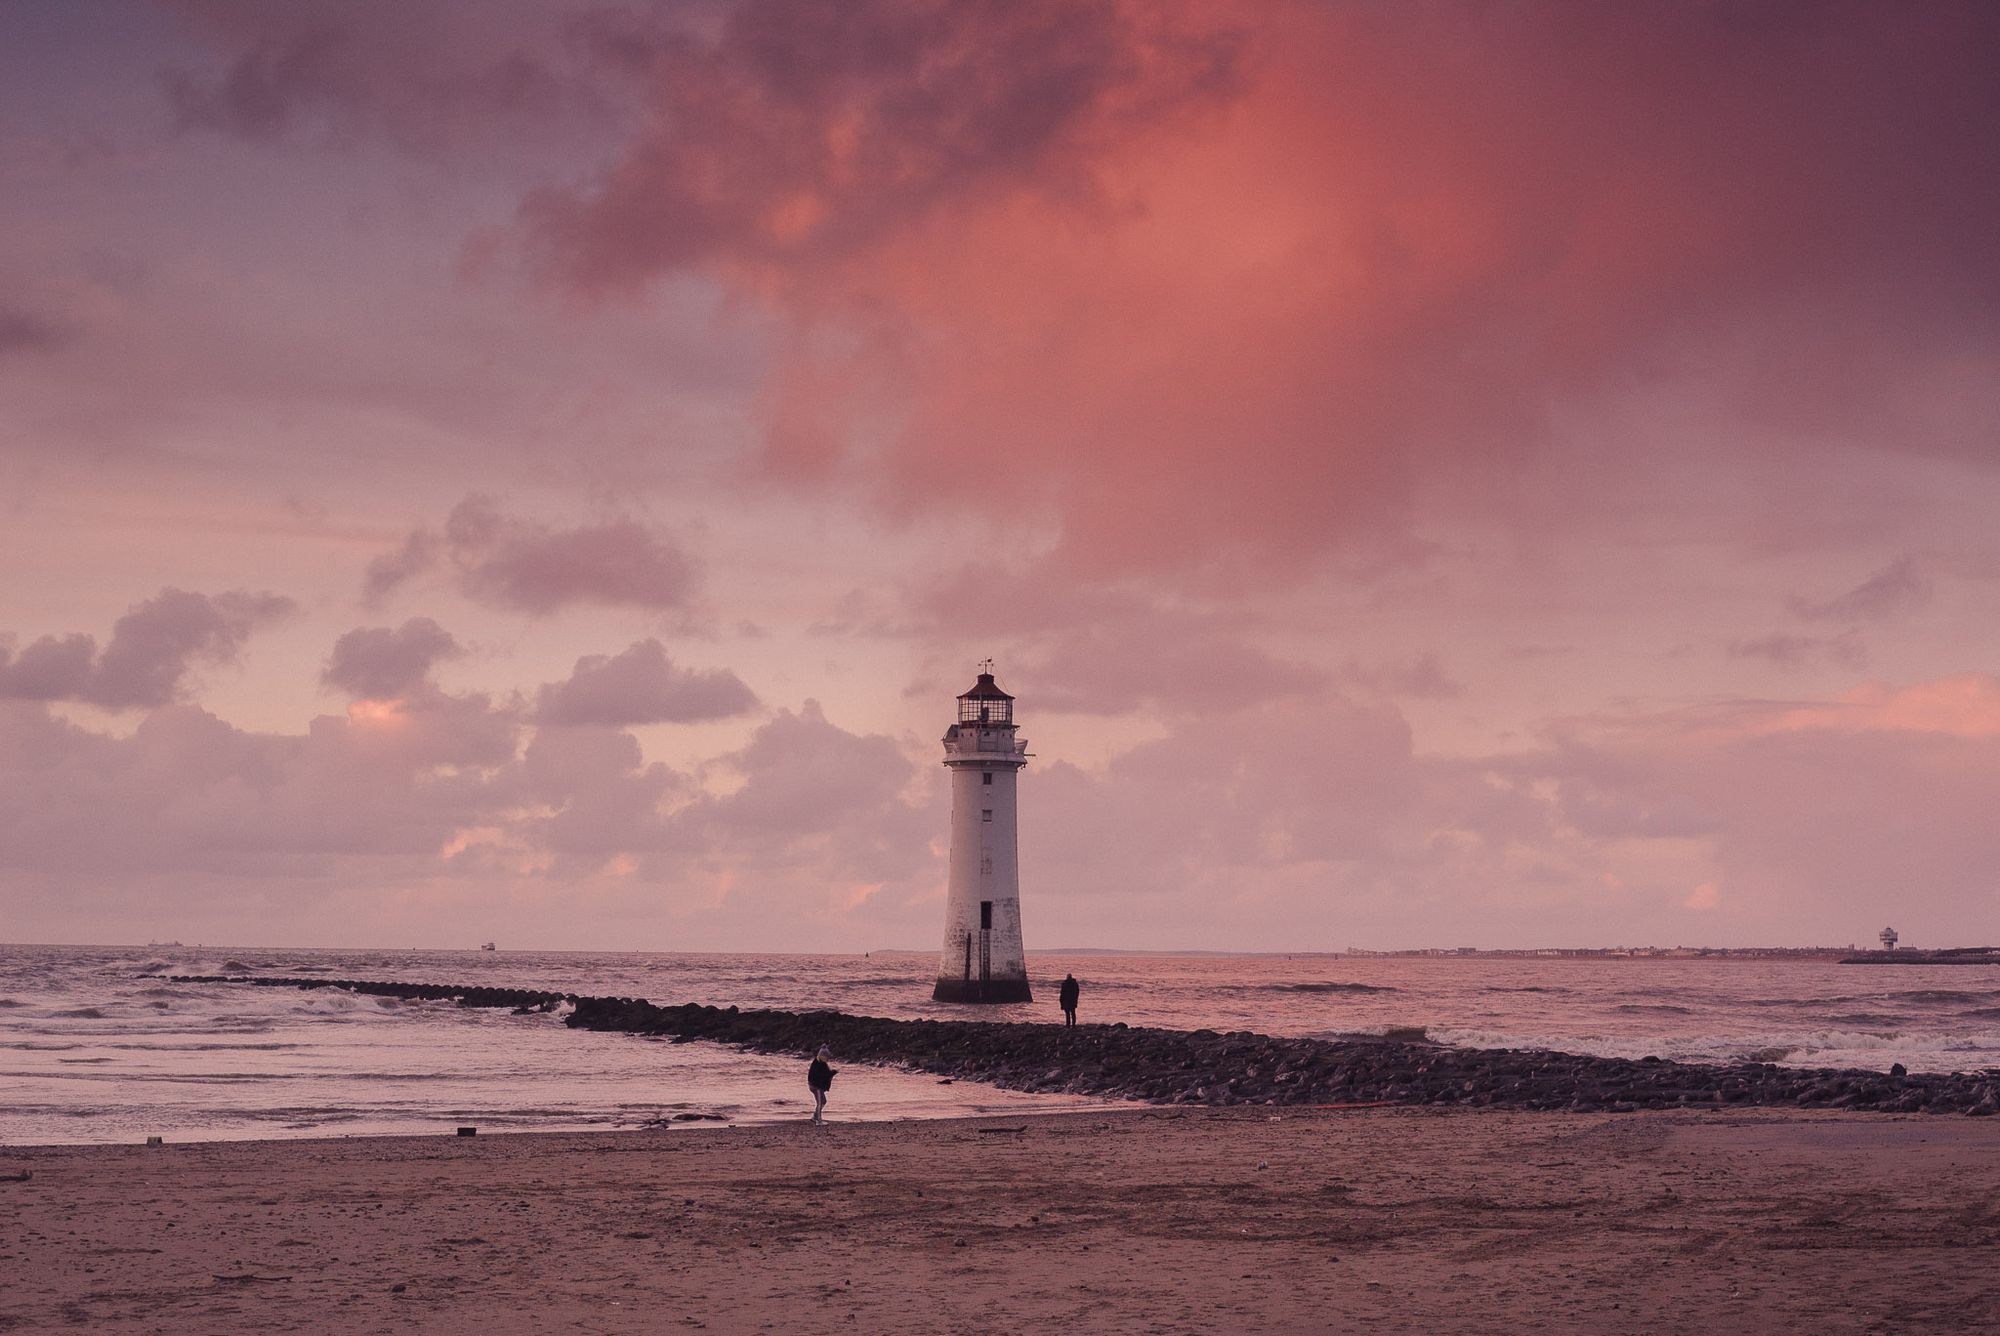 New Brighton lighthouse at sunset. Orange clouds fill the sky and the tide is coming in.